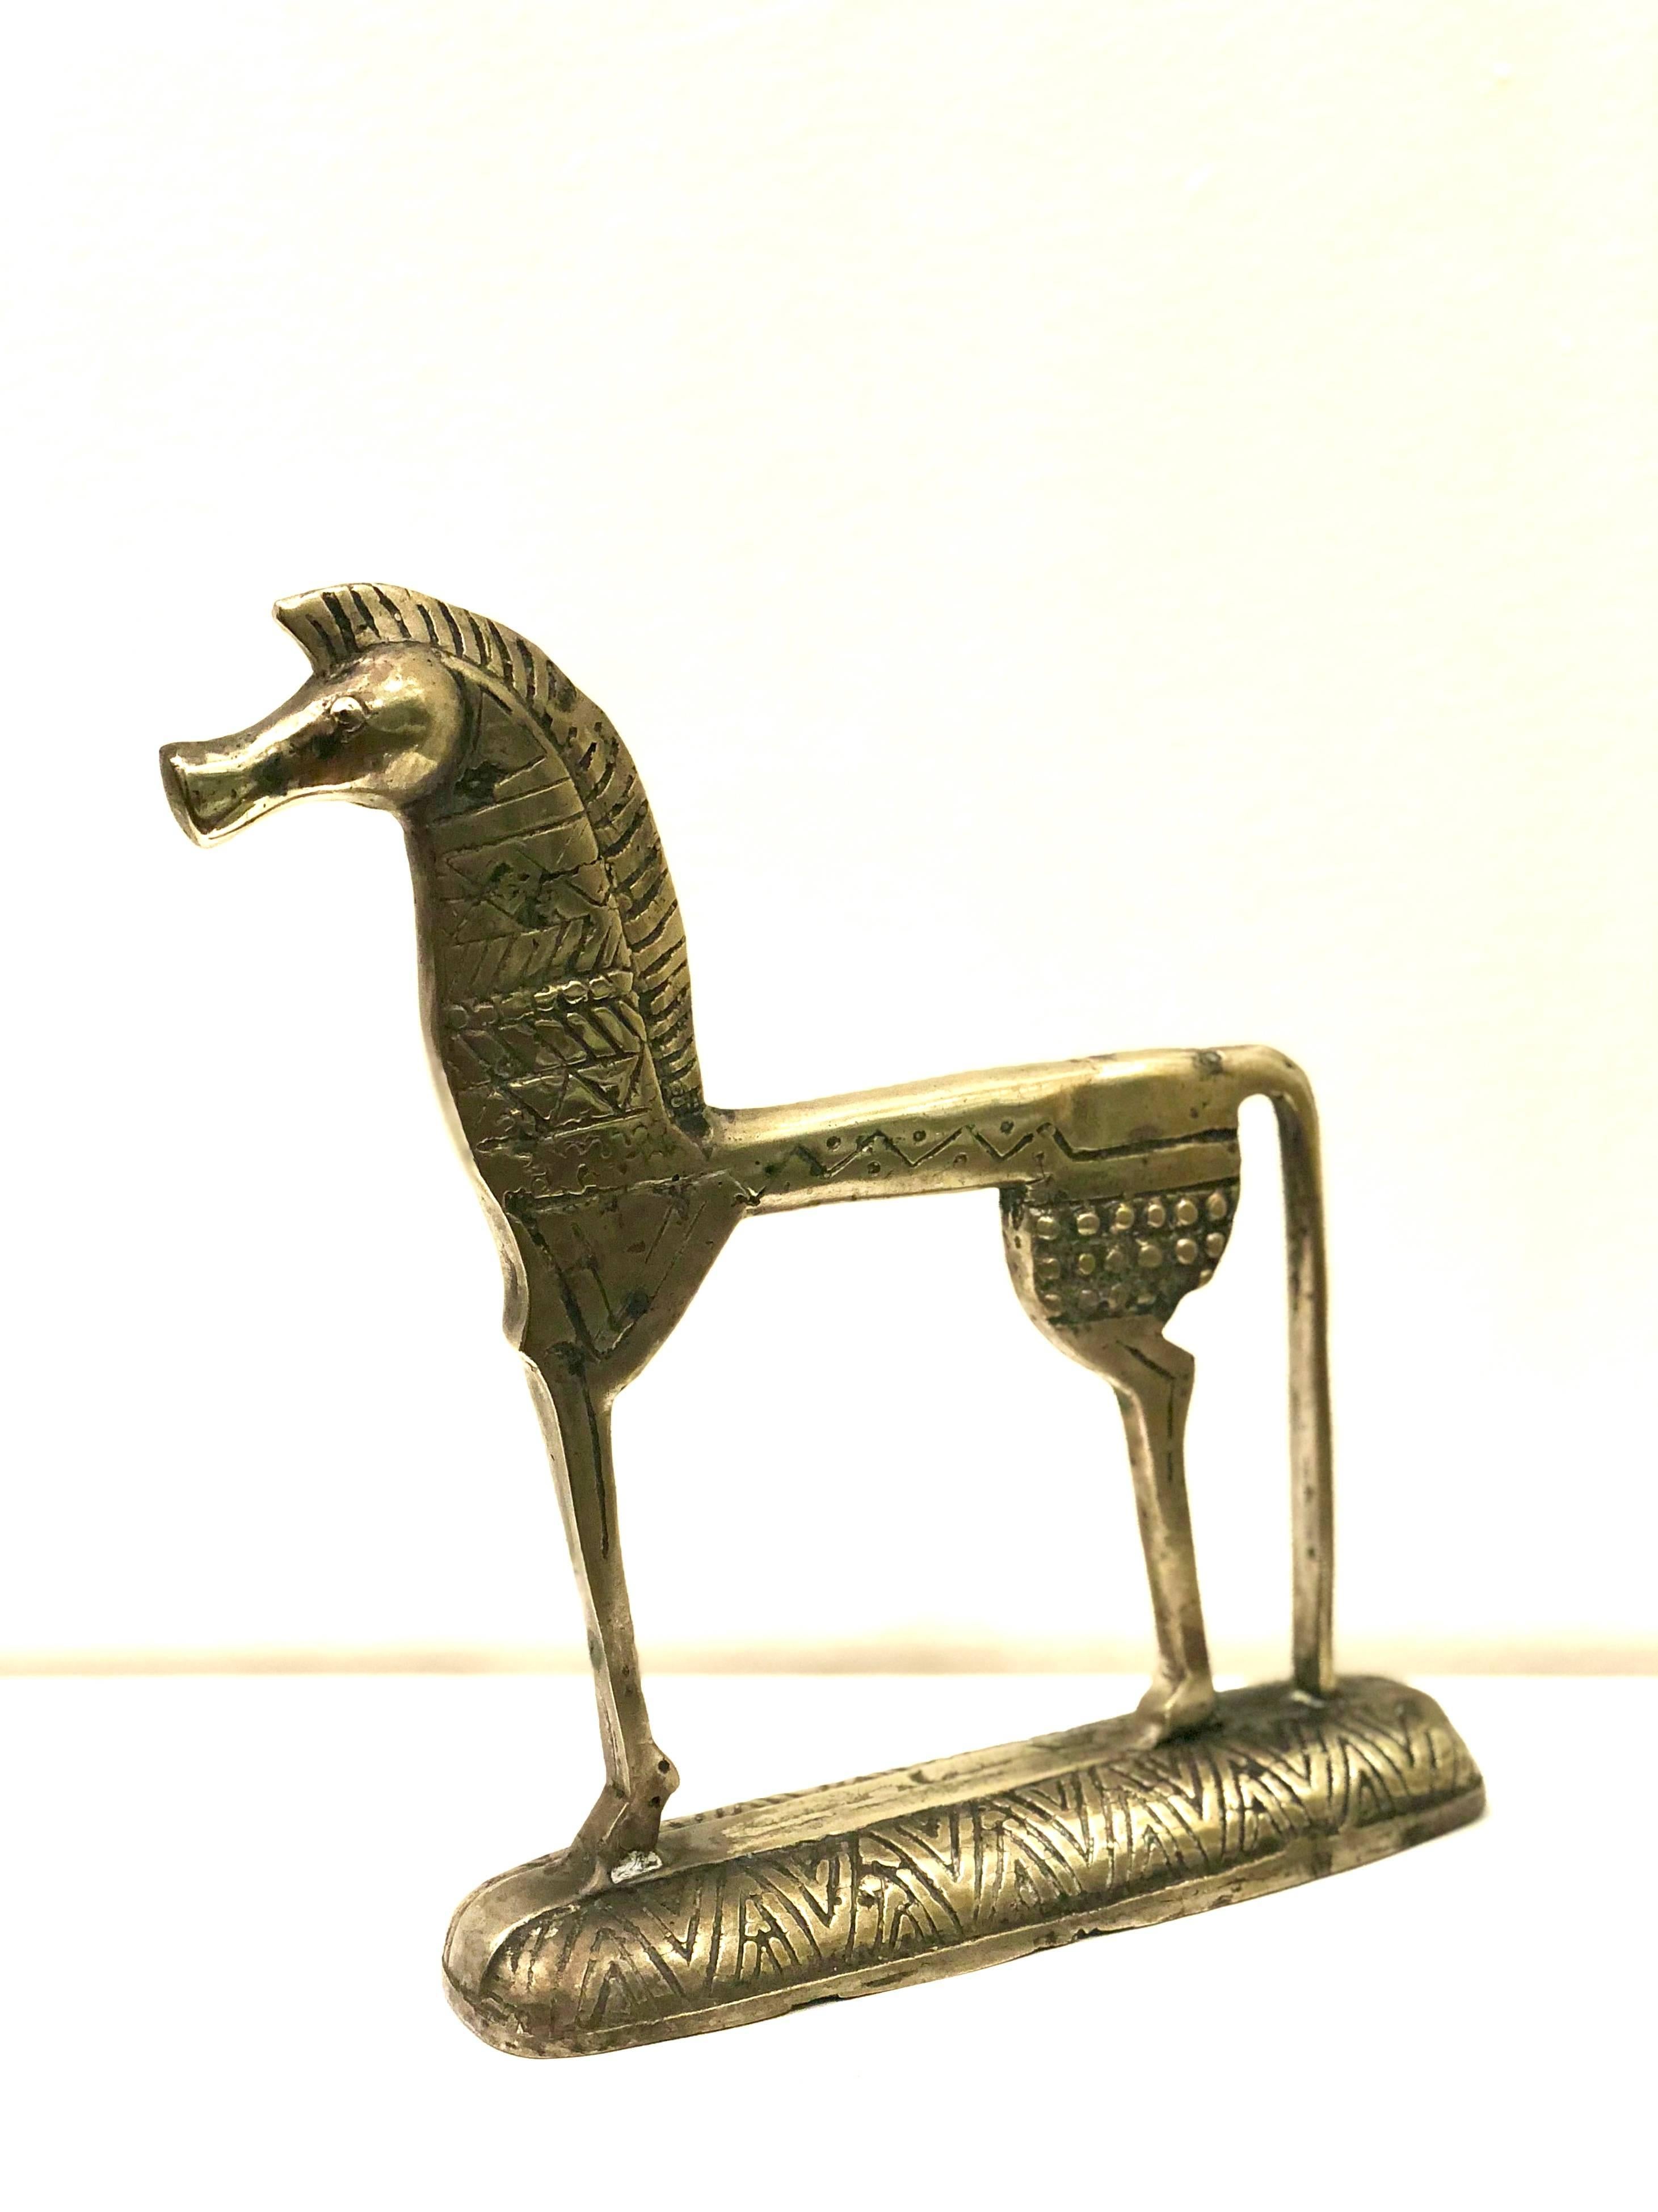 Simple elegant Etruscan brass horse sculpture, circa 1970s in a patinated brass finish.